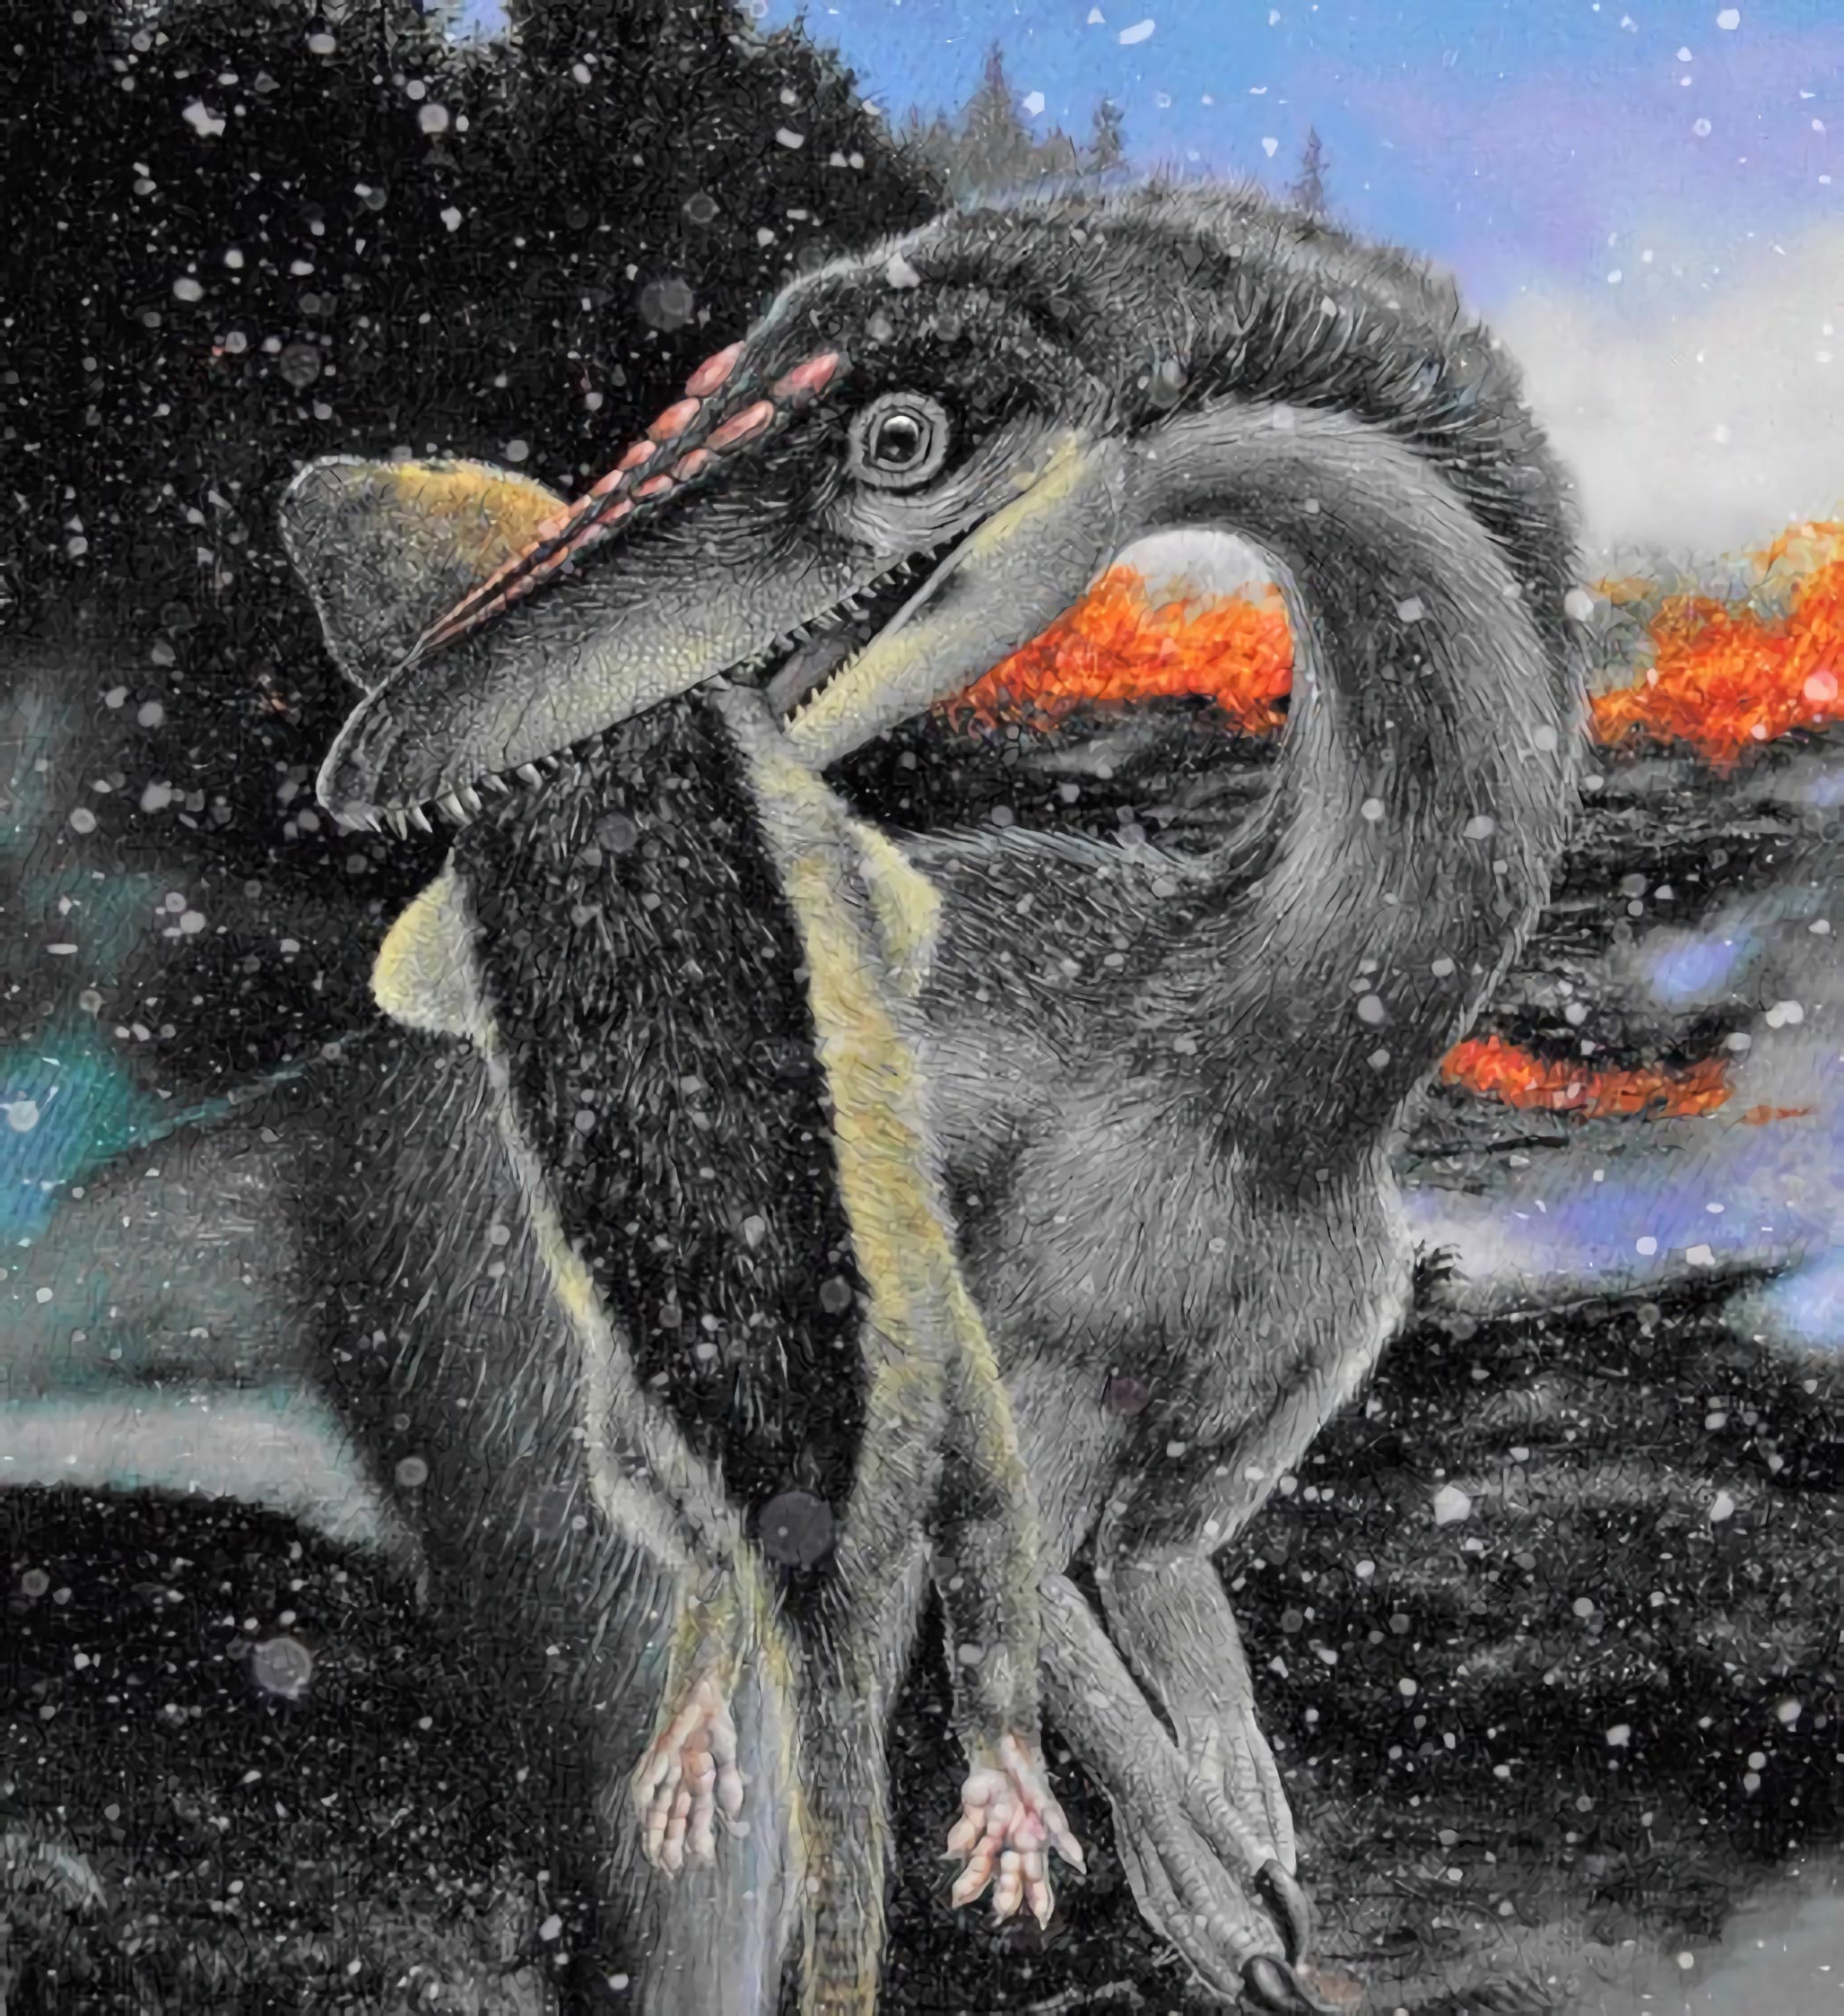 Study of Ancient Mass Extinction Reveals Dinosaurs Took Over Earth Amid Ice, Not Warmth - SciTechDaily